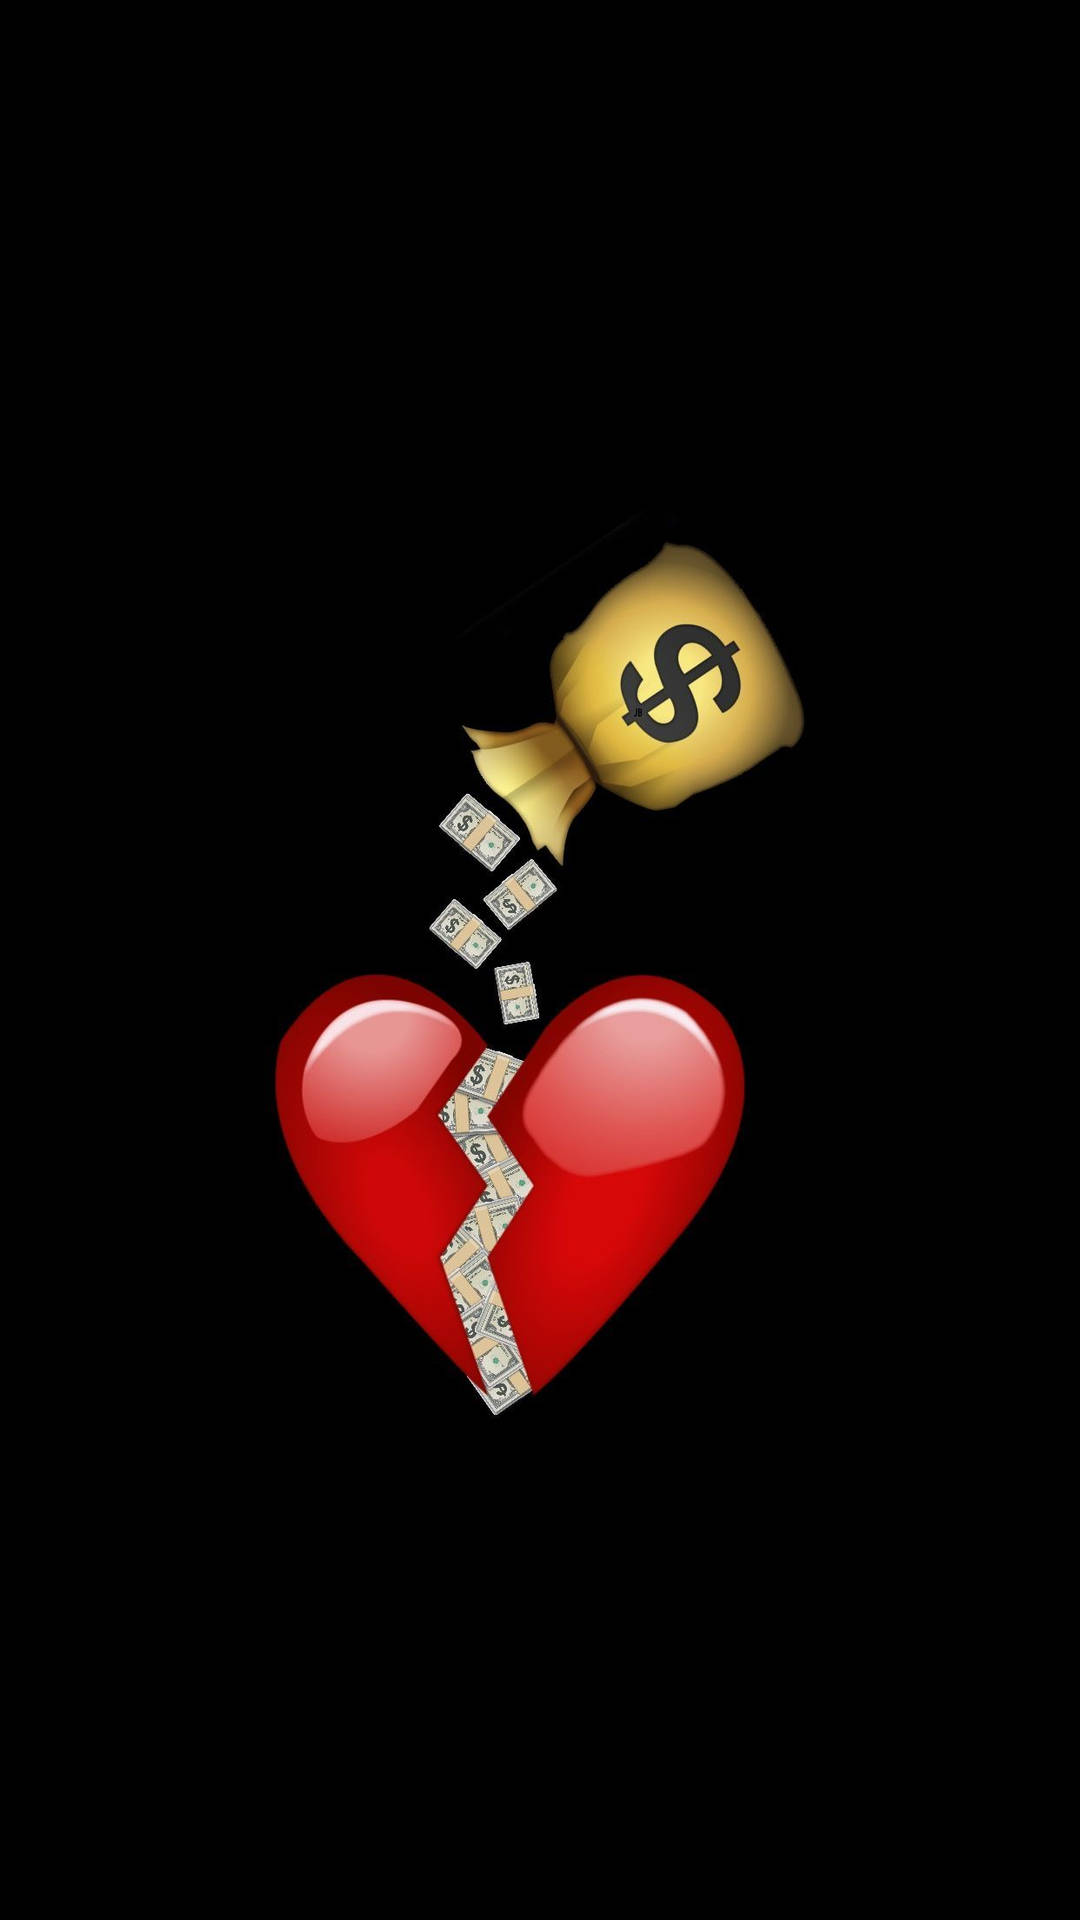 A Striking Depiction Of A Broken Heart Surrounded By Dollar Notes